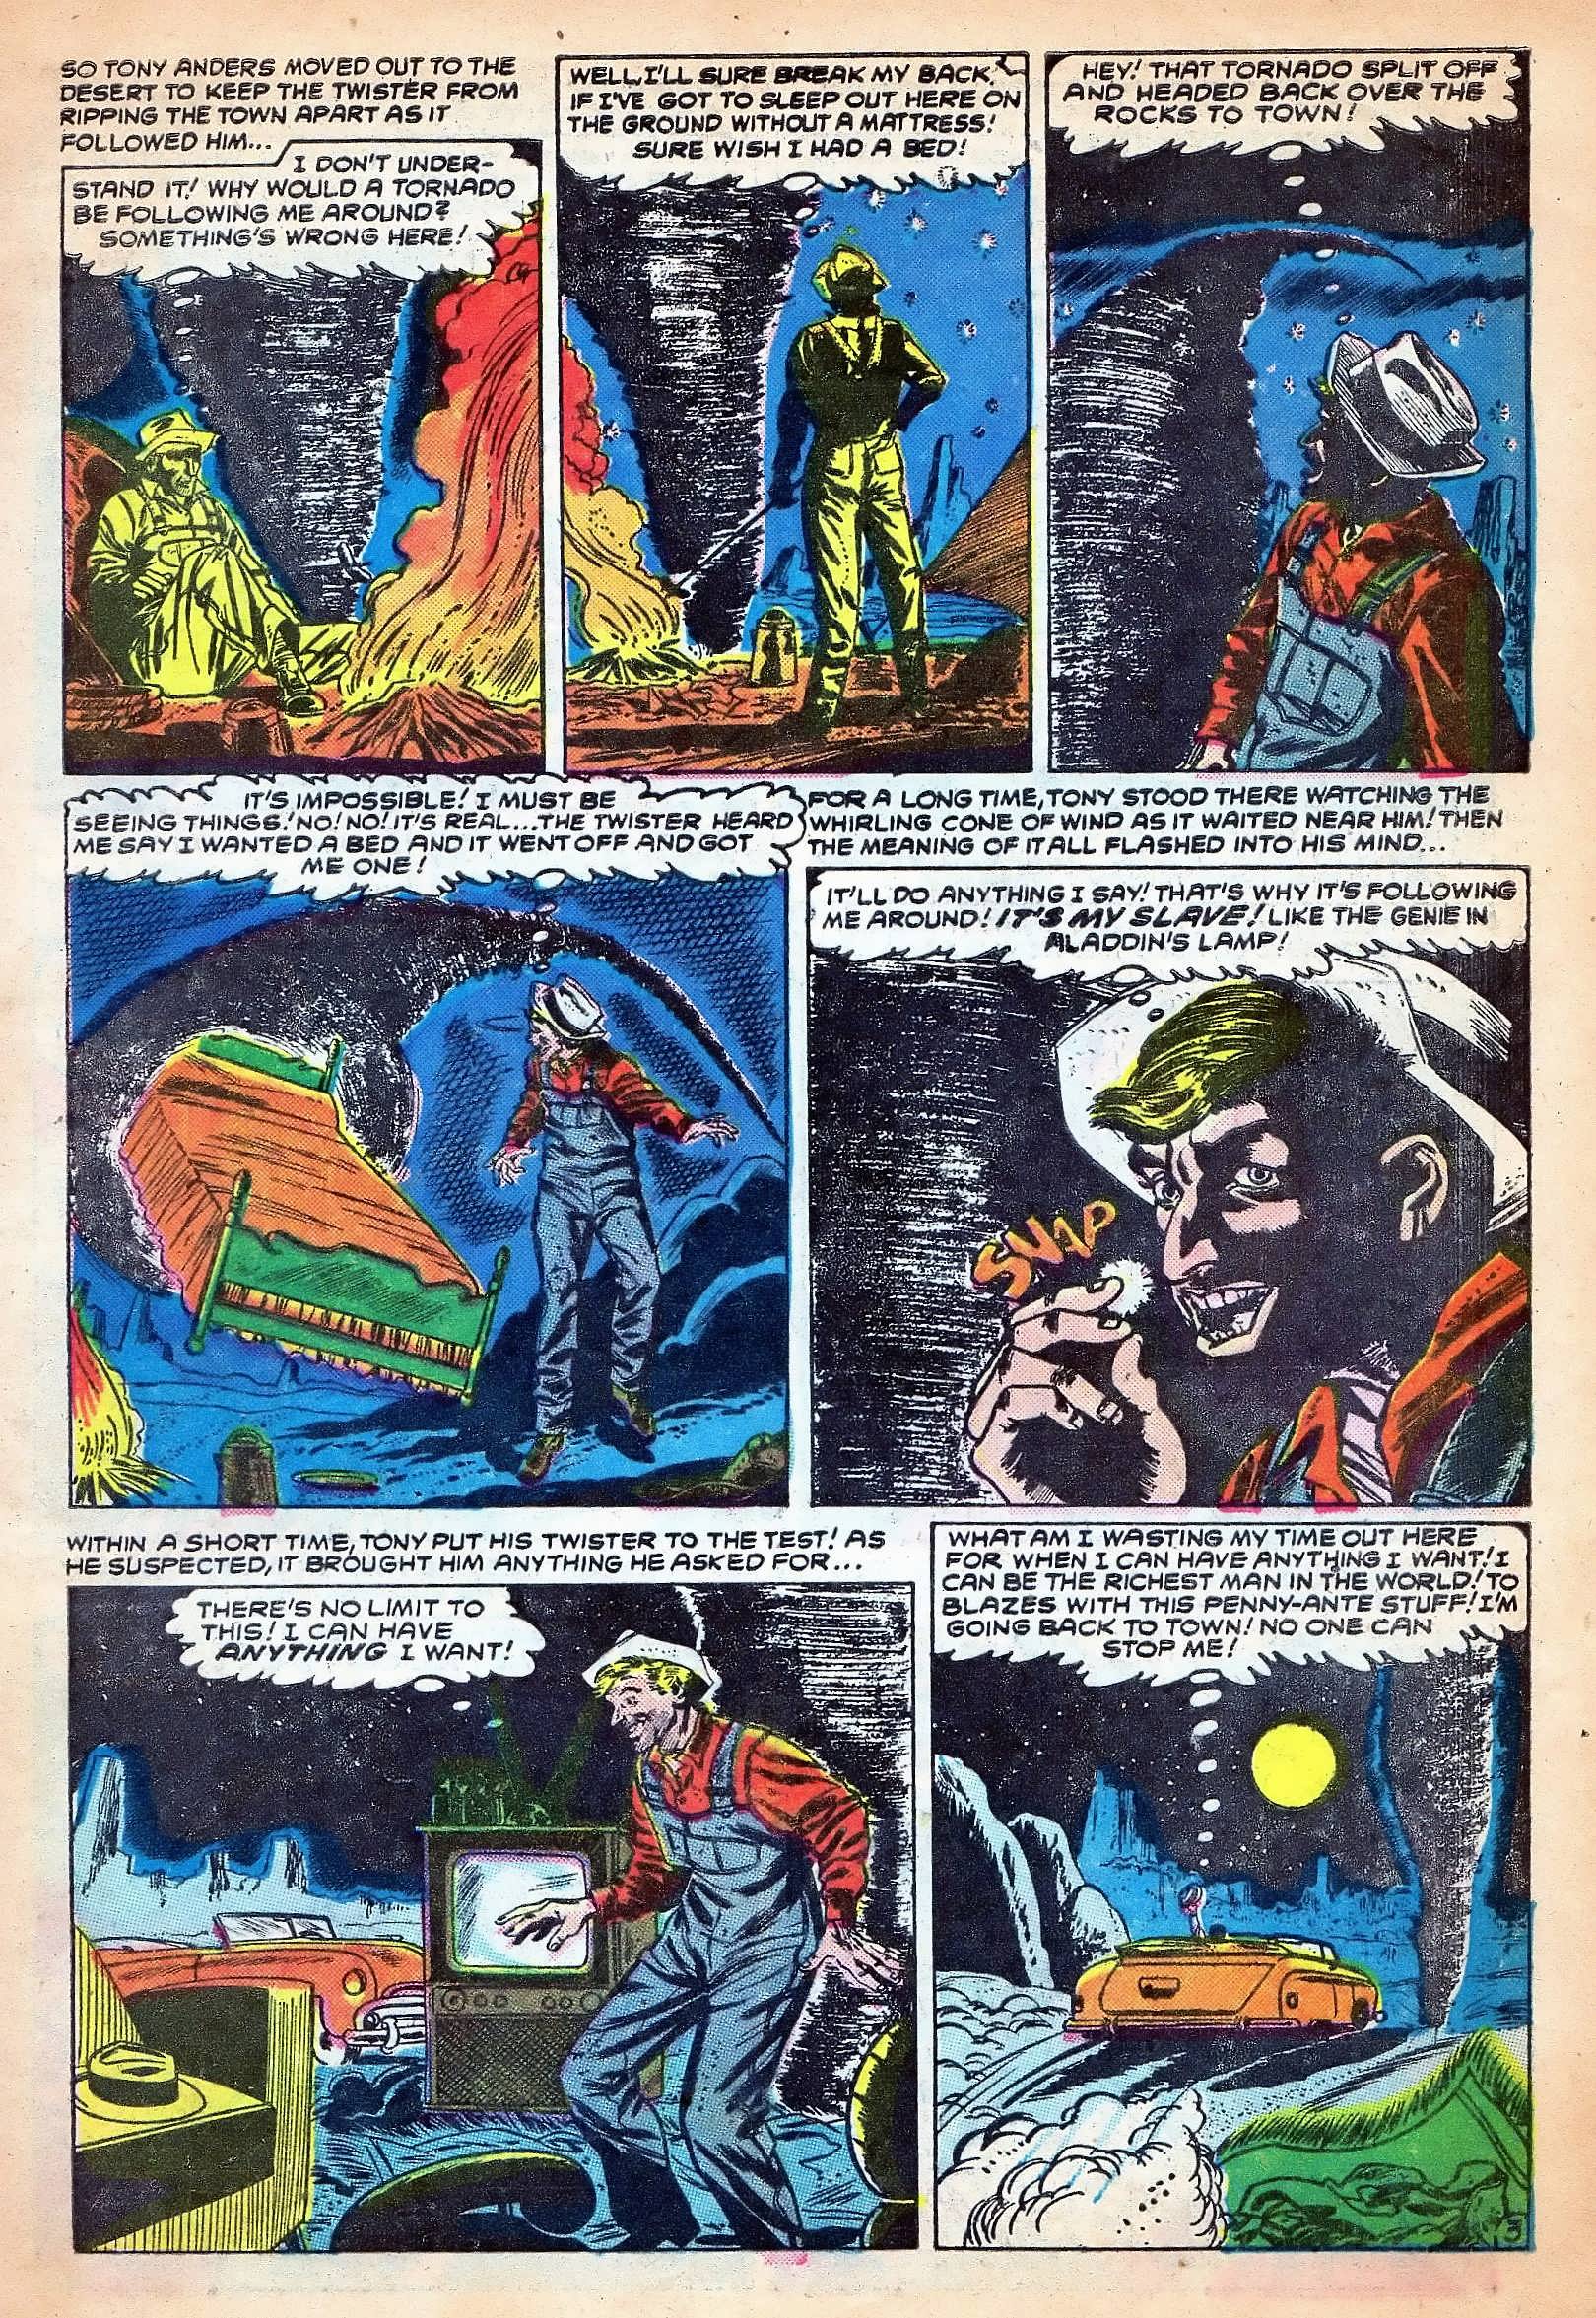 Marvel Tales (1949) 130 Page 4